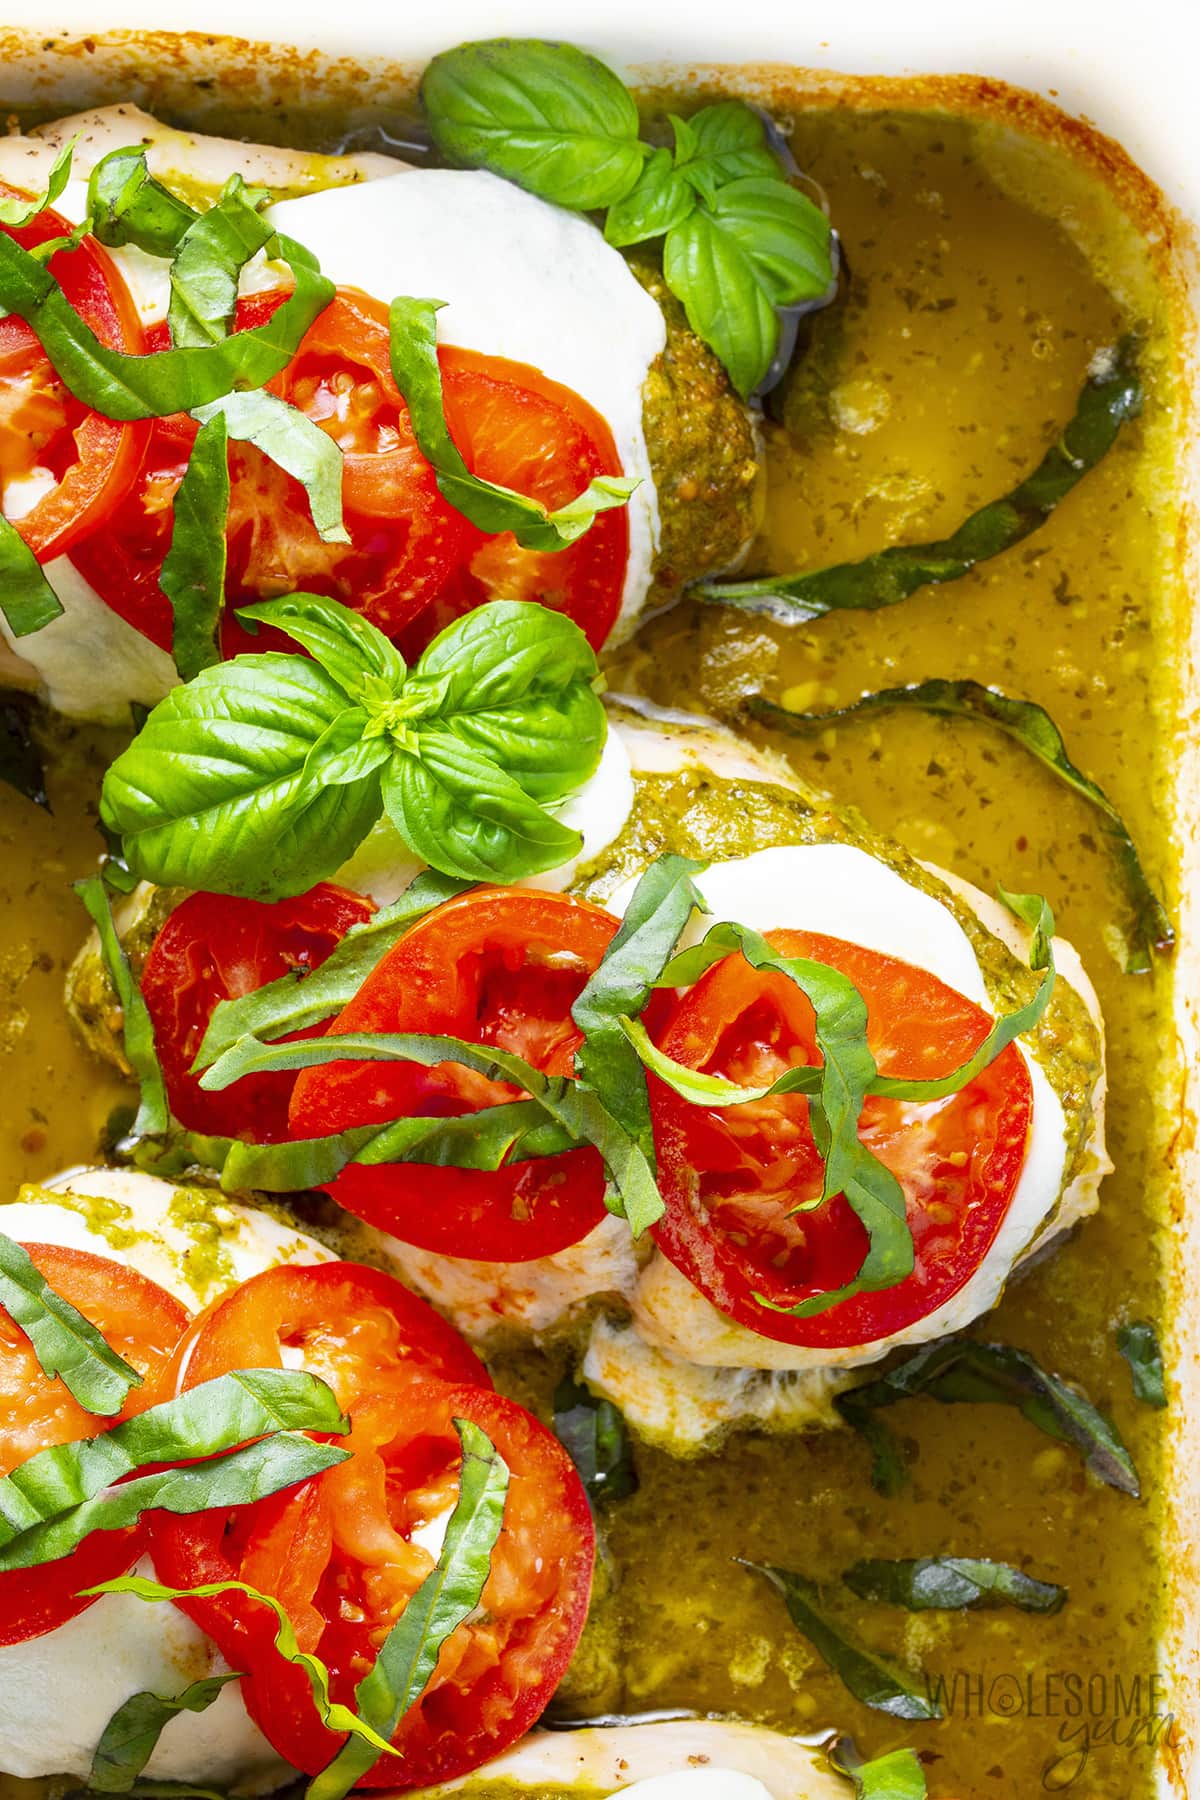 Pesto chicken with mozzarella, sliced tomatoes, and fresh basil in a baking dish.